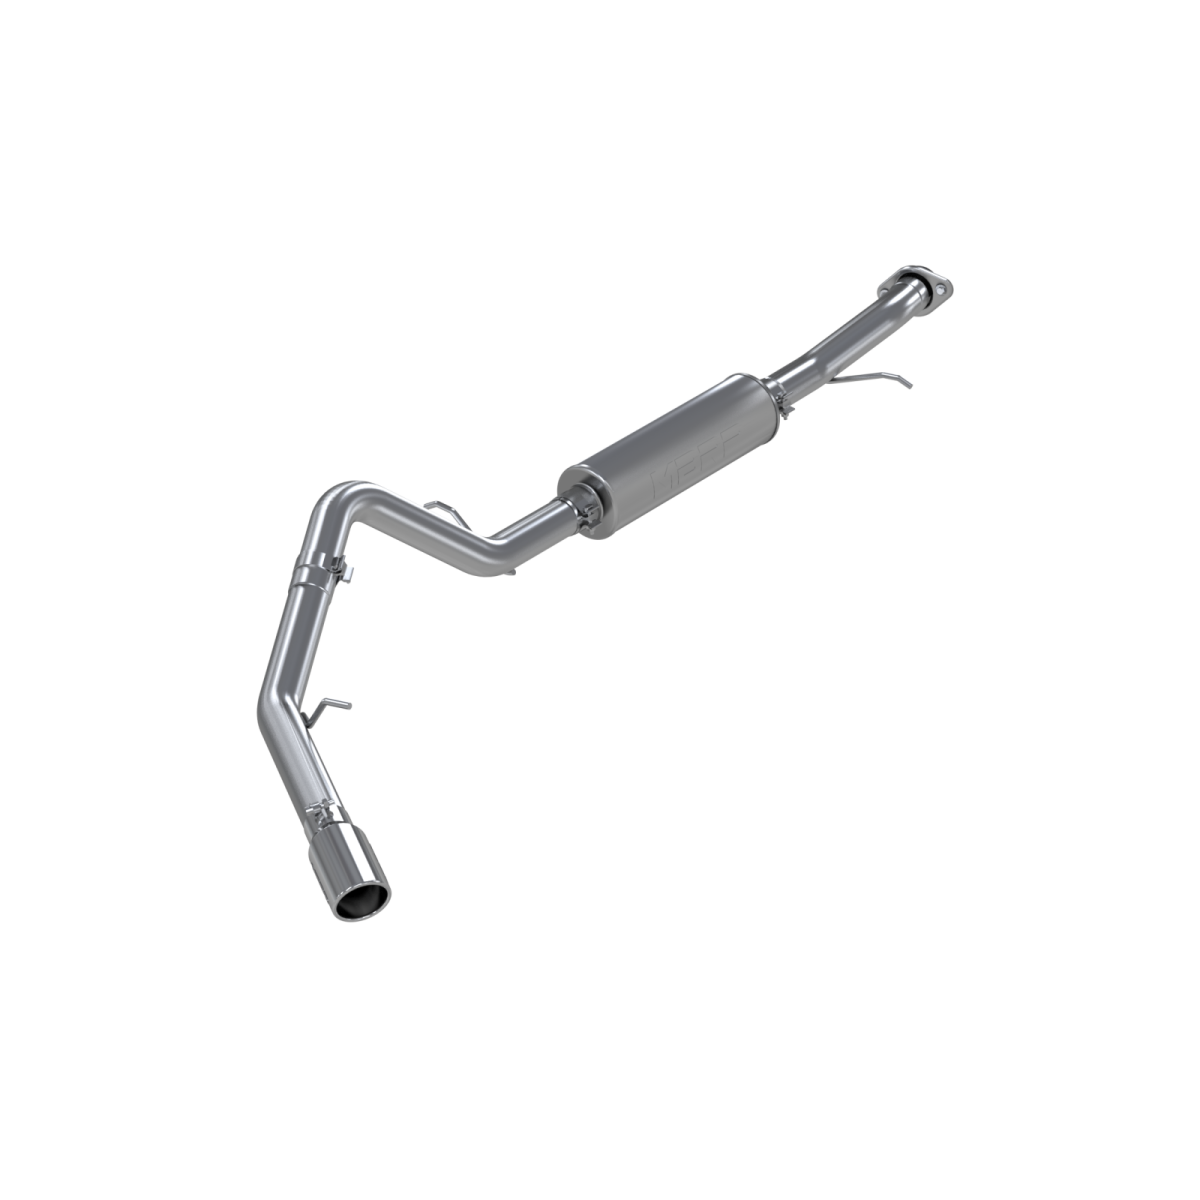 MBRP - MBRP Cat Back Exhaust System Single Side T409 Stainless Steel For 00-06 Tahoe/Yukon 5.3L S5026409